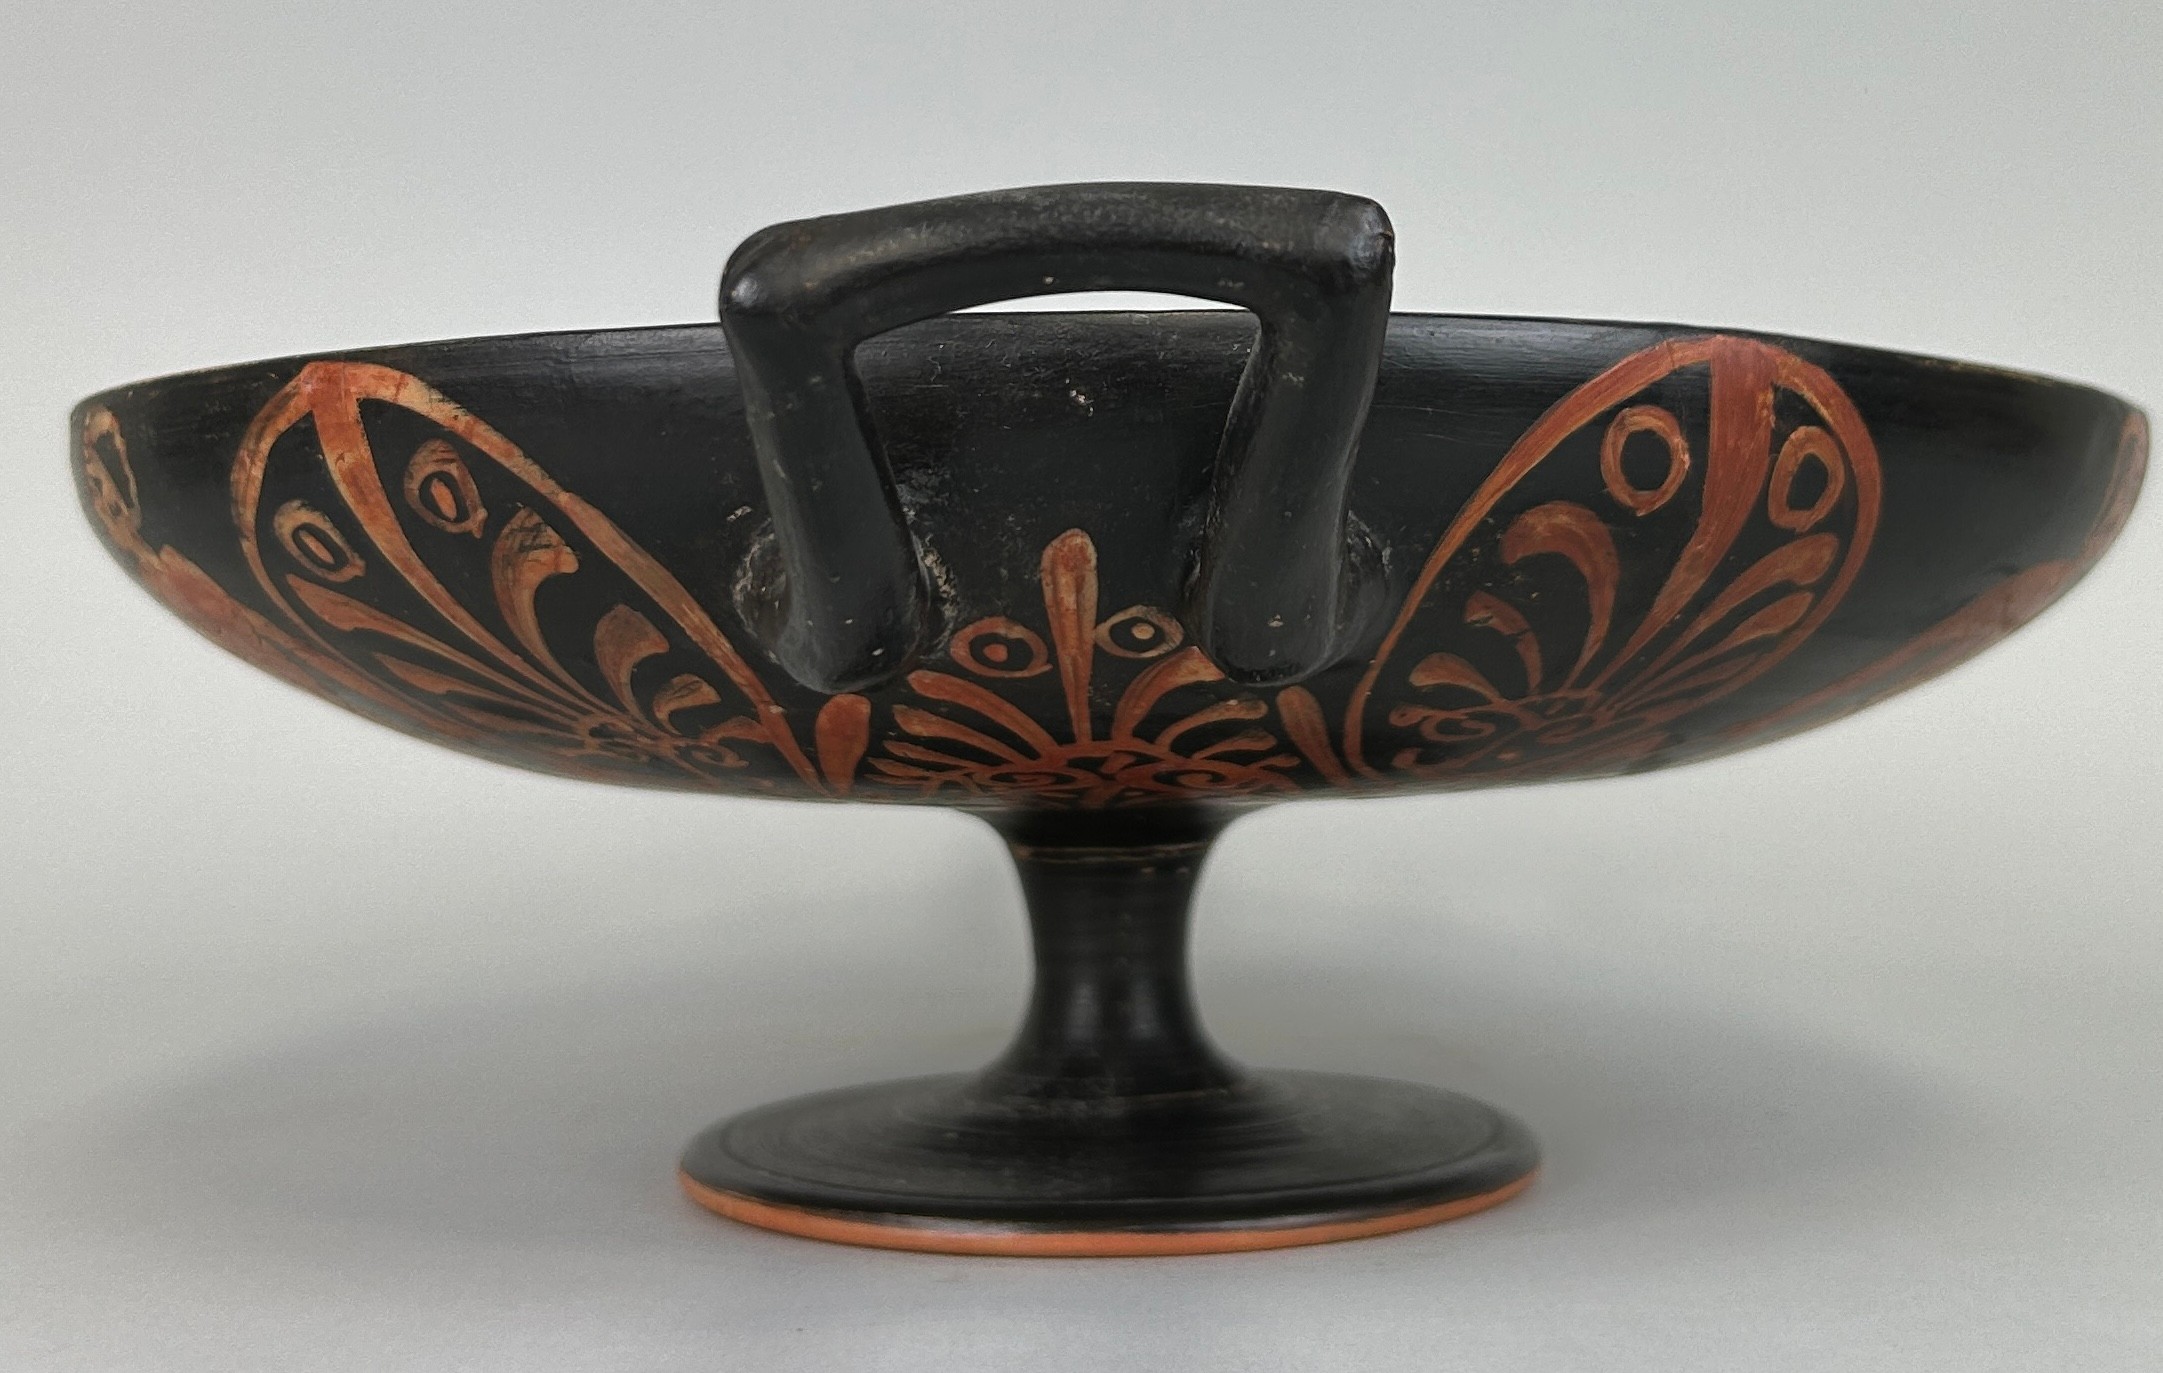 AN APULIAN POTTERY KYLIX DECORATED WITH A HORSE AND RIDER CIRCA 5TH CENTURY B.C. - Image 6 of 10